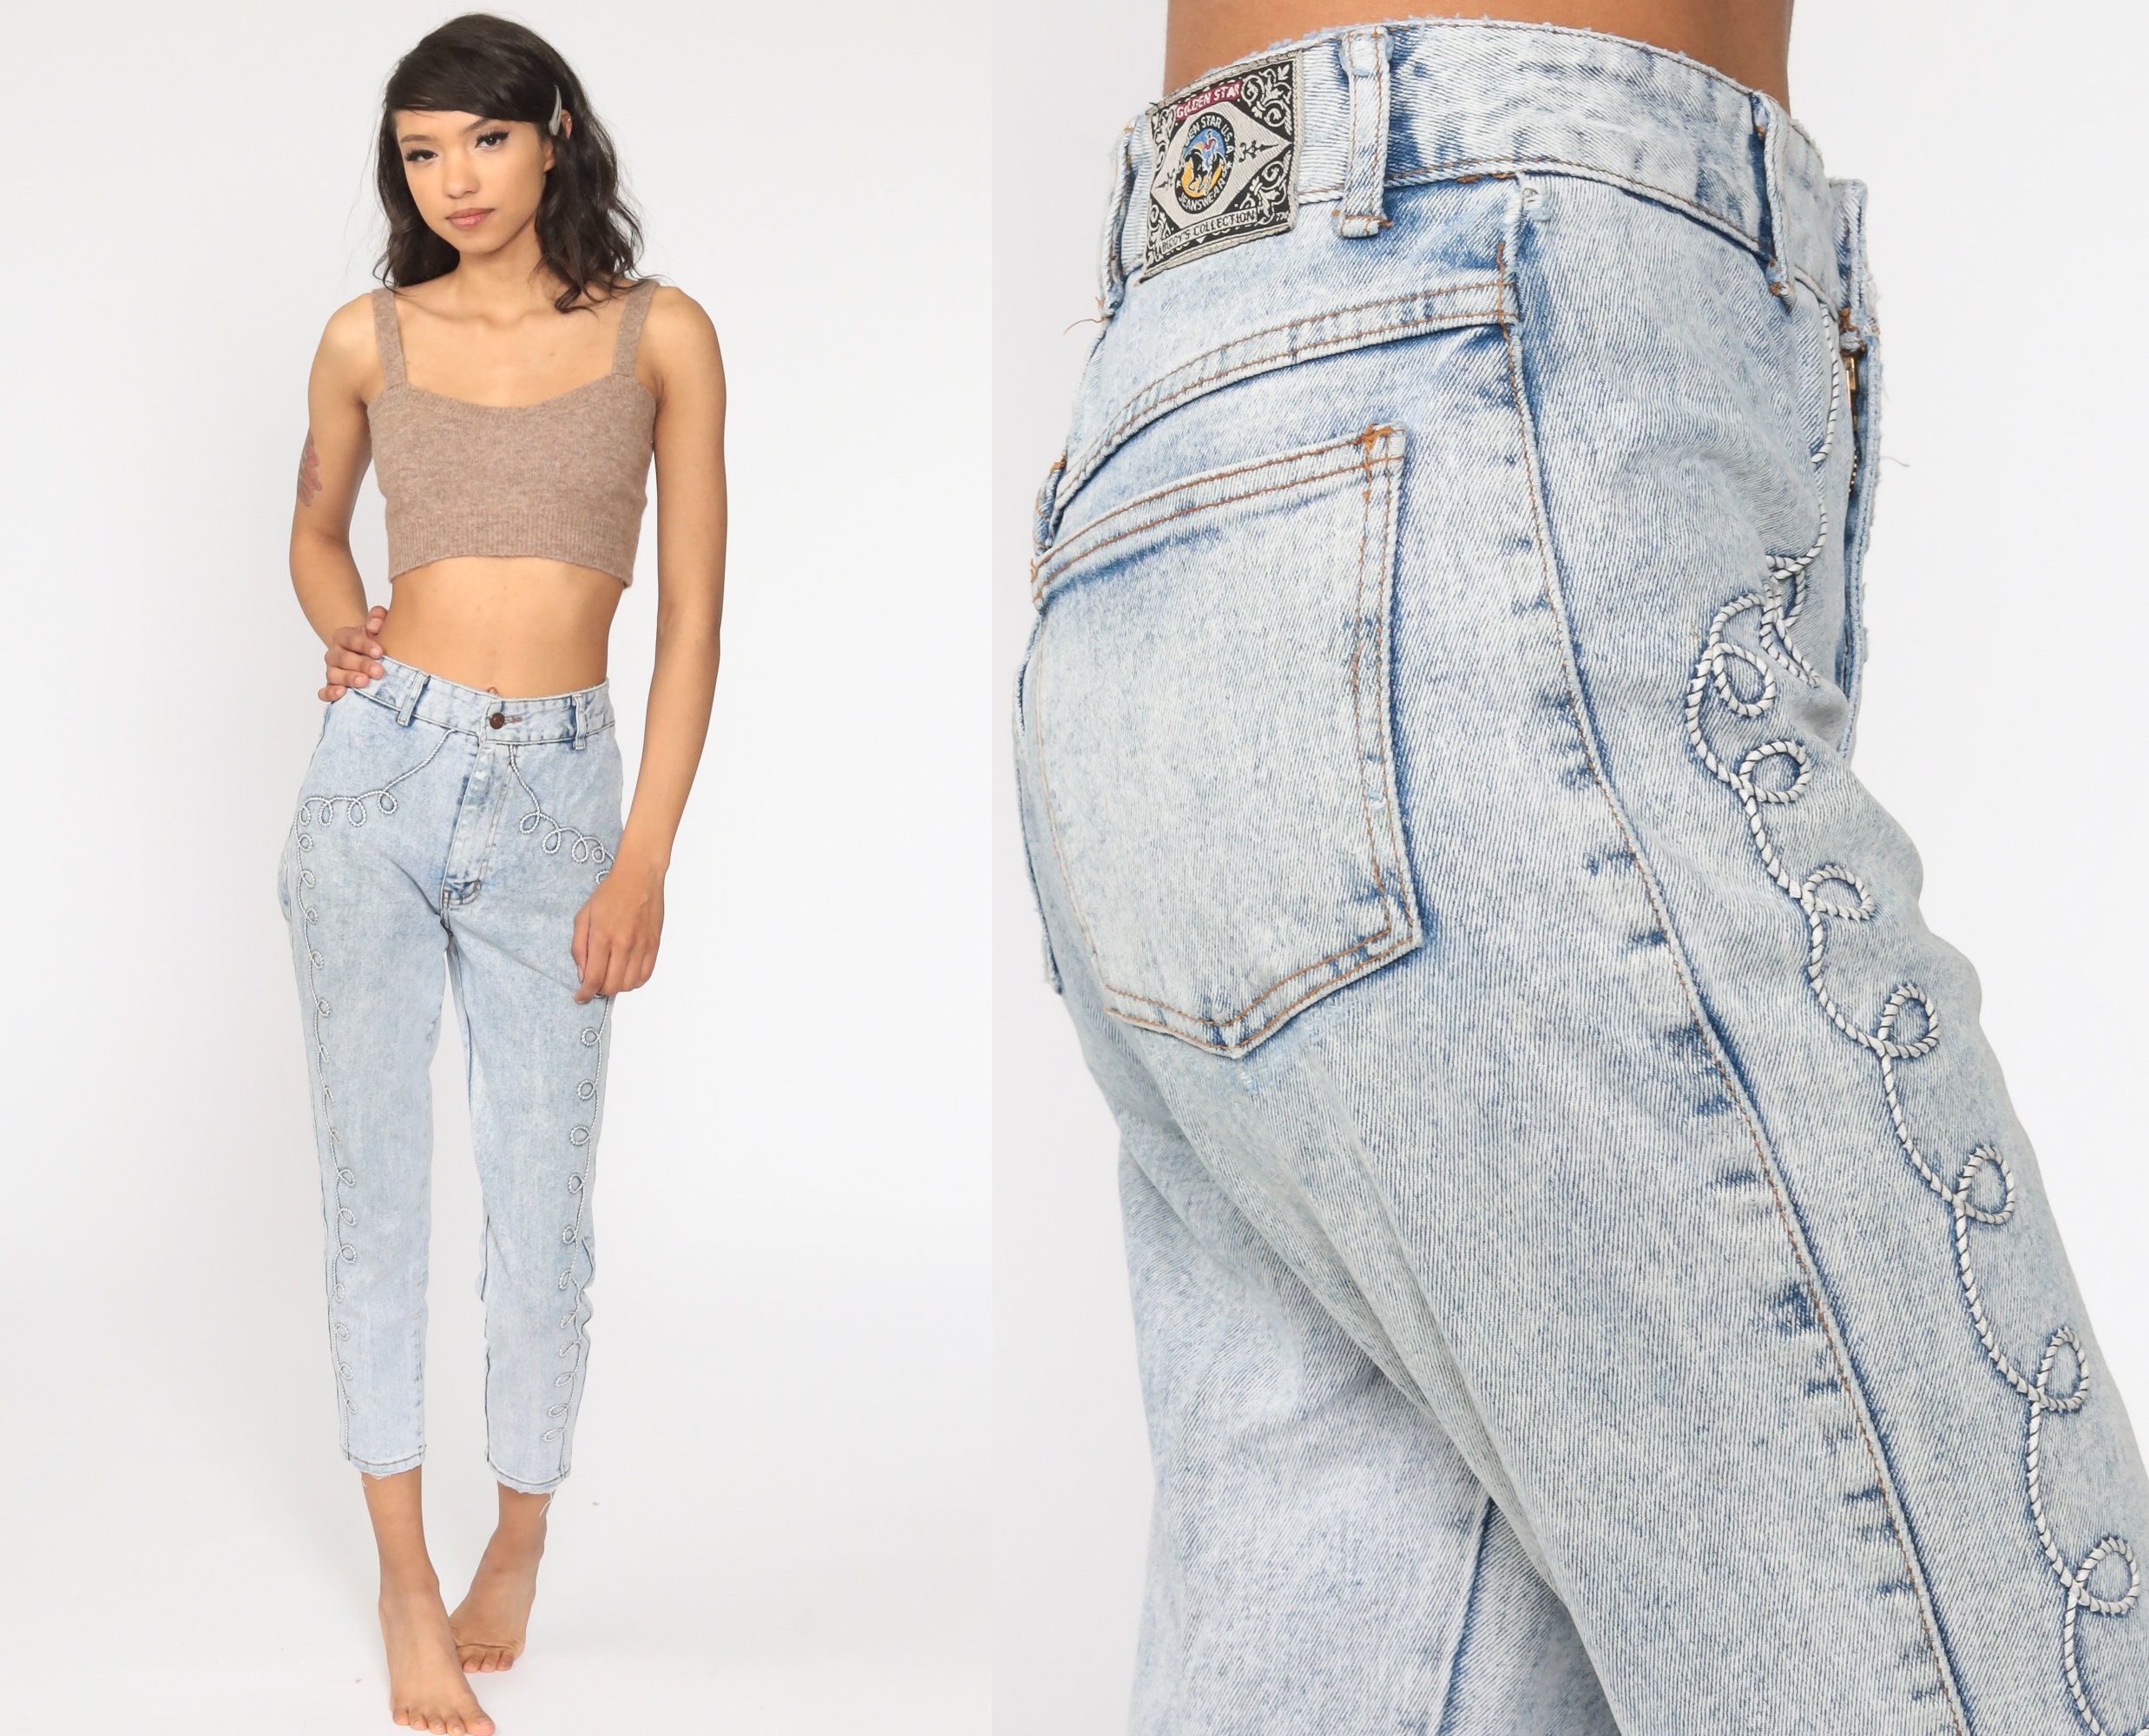 Skinny High Waisted Jeans 80s Acid Wash Blue Ankle Denim Cigarette Pants  Ultra High Waist 90s Vintage Hipster Faded Small 26